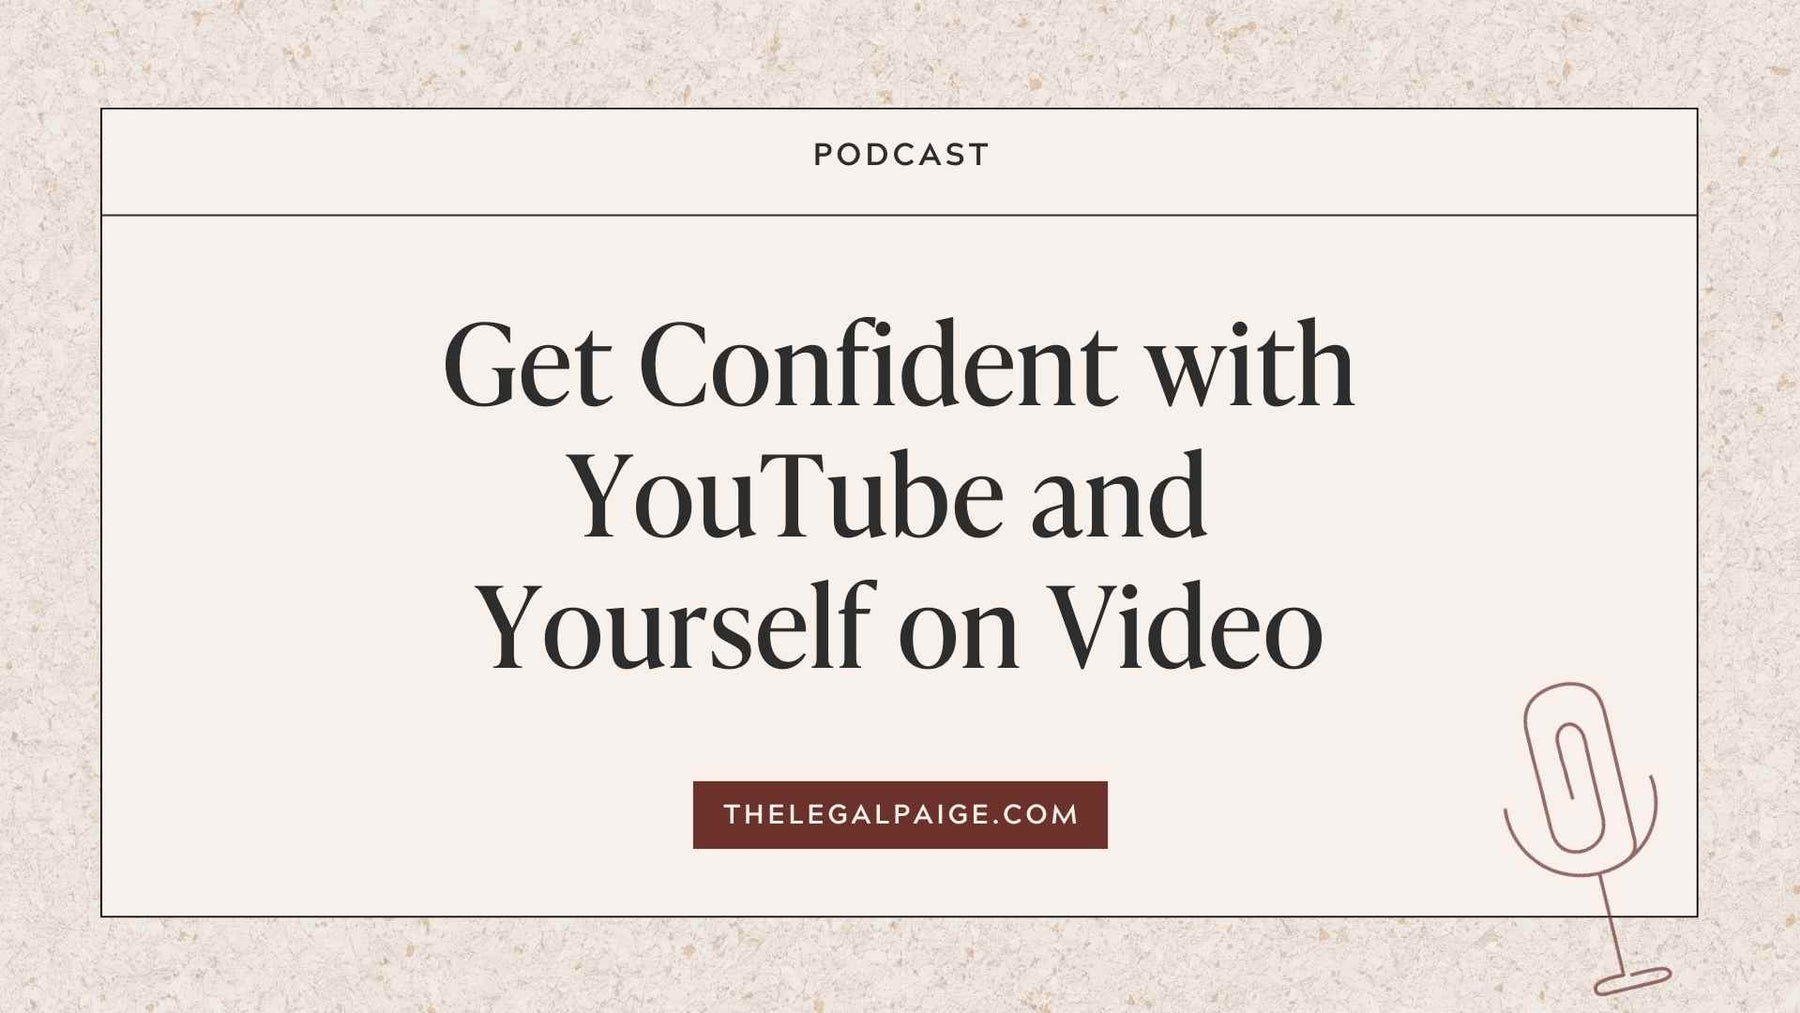 Episode 28: Get Confident with YouTube and Yourself on Video